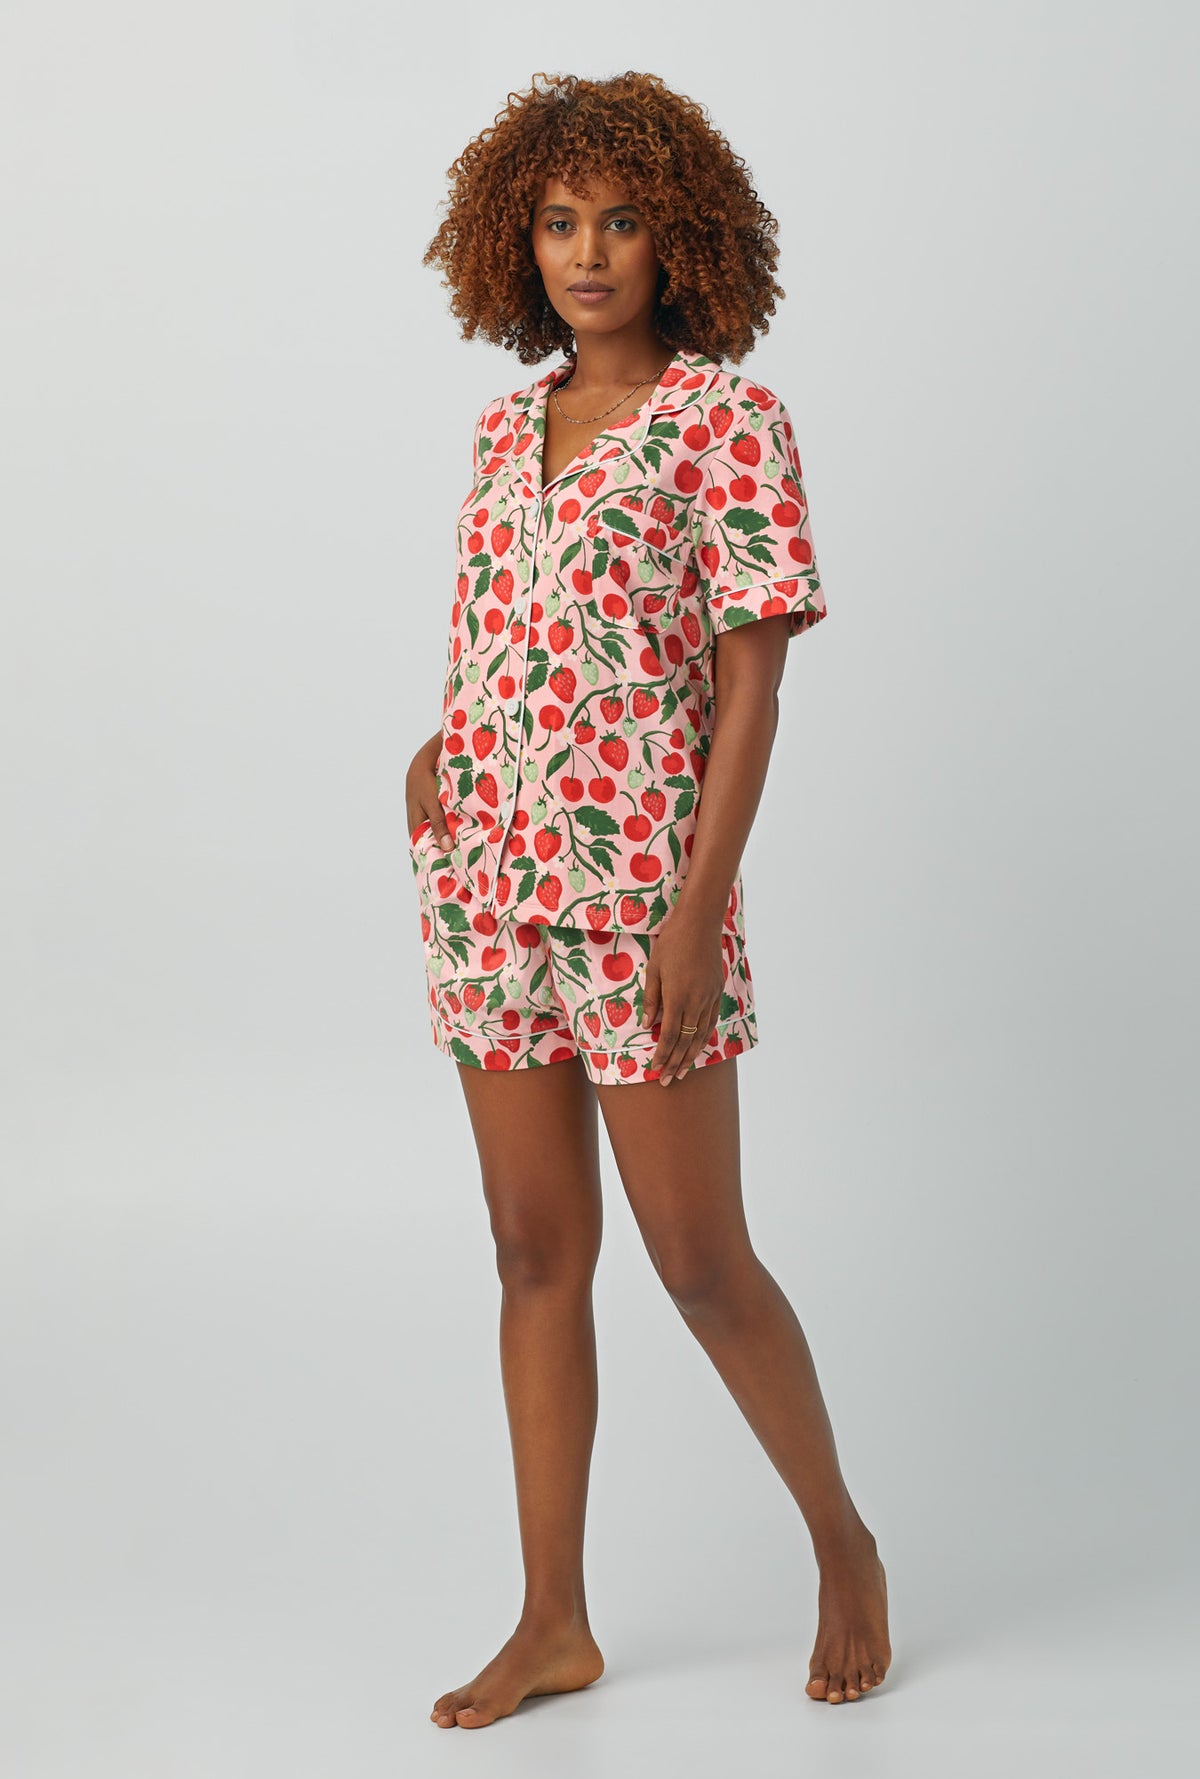 A lady wearing Short Sleeve Classic Shorty Stretch Jersey PJ Set with berry bliss print